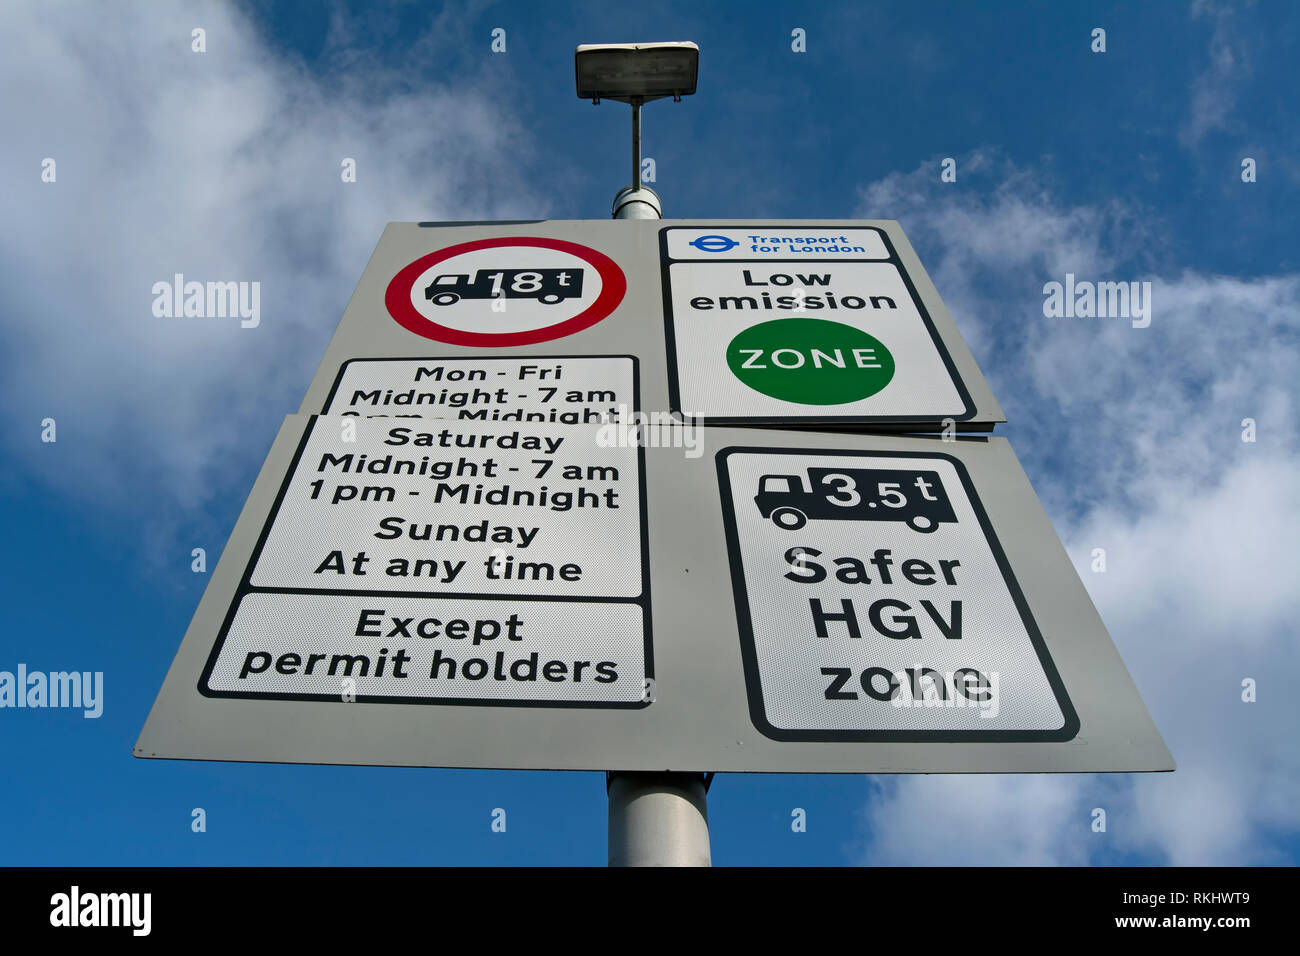 road sign in kingston, surrey, england, denoting a low emissions zone, a safer hgv zone, weight limits and parking restrictions Stock Photo